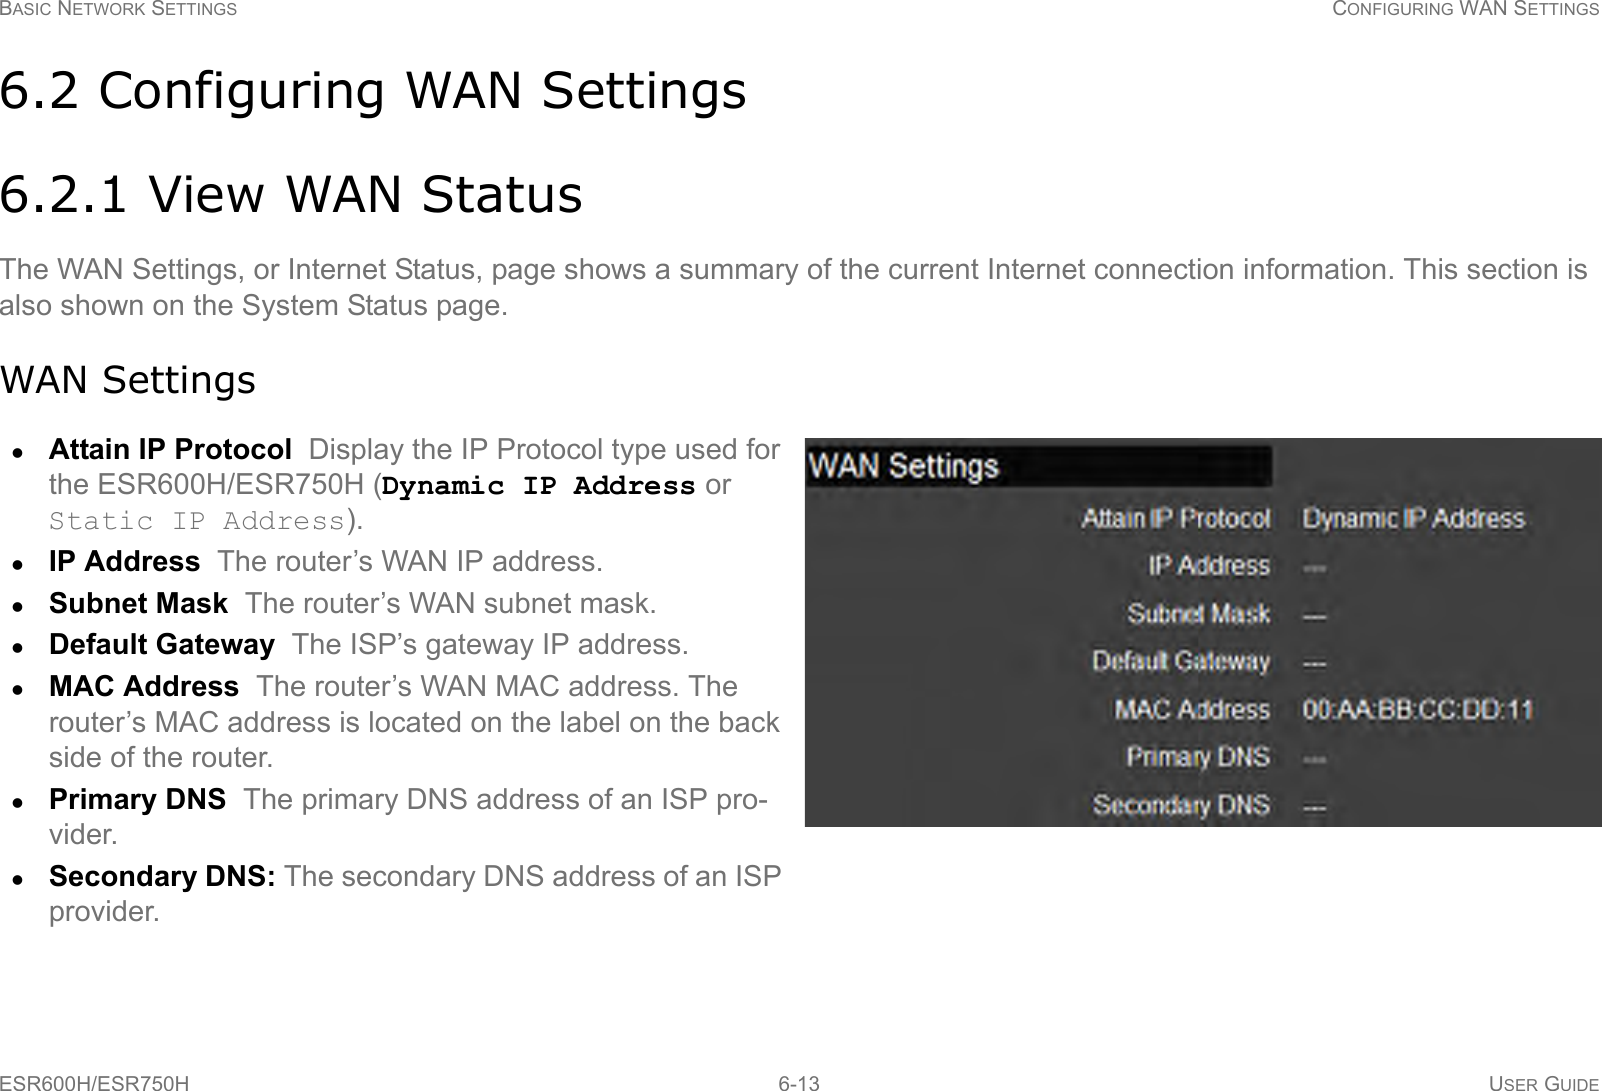 BASIC NETWORK SETTINGS CONFIGURING WAN SETTINGSESR600H/ESR750H 6-13 USER GUIDE6.2 Configuring WAN Settings6.2.1 View WAN StatusThe WAN Settings, or Internet Status, page shows a summary of the current Internet connection information. This section is also shown on the System Status page.WAN SettingsAttain IP Protocol  Display the IP Protocol type used for the ESR600H/ESR750H (Dynamic IP Address or Static IP Address).IP Address  The router’s WAN IP address.Subnet Mask  The router’s WAN subnet mask.Default Gateway  The ISP’s gateway IP address.MAC Address  The router’s WAN MAC address. The router’s MAC address is located on the label on the back side of the router.Primary DNS  The primary DNS address of an ISP pro-vider.Secondary DNS: The secondary DNS address of an ISP provider.